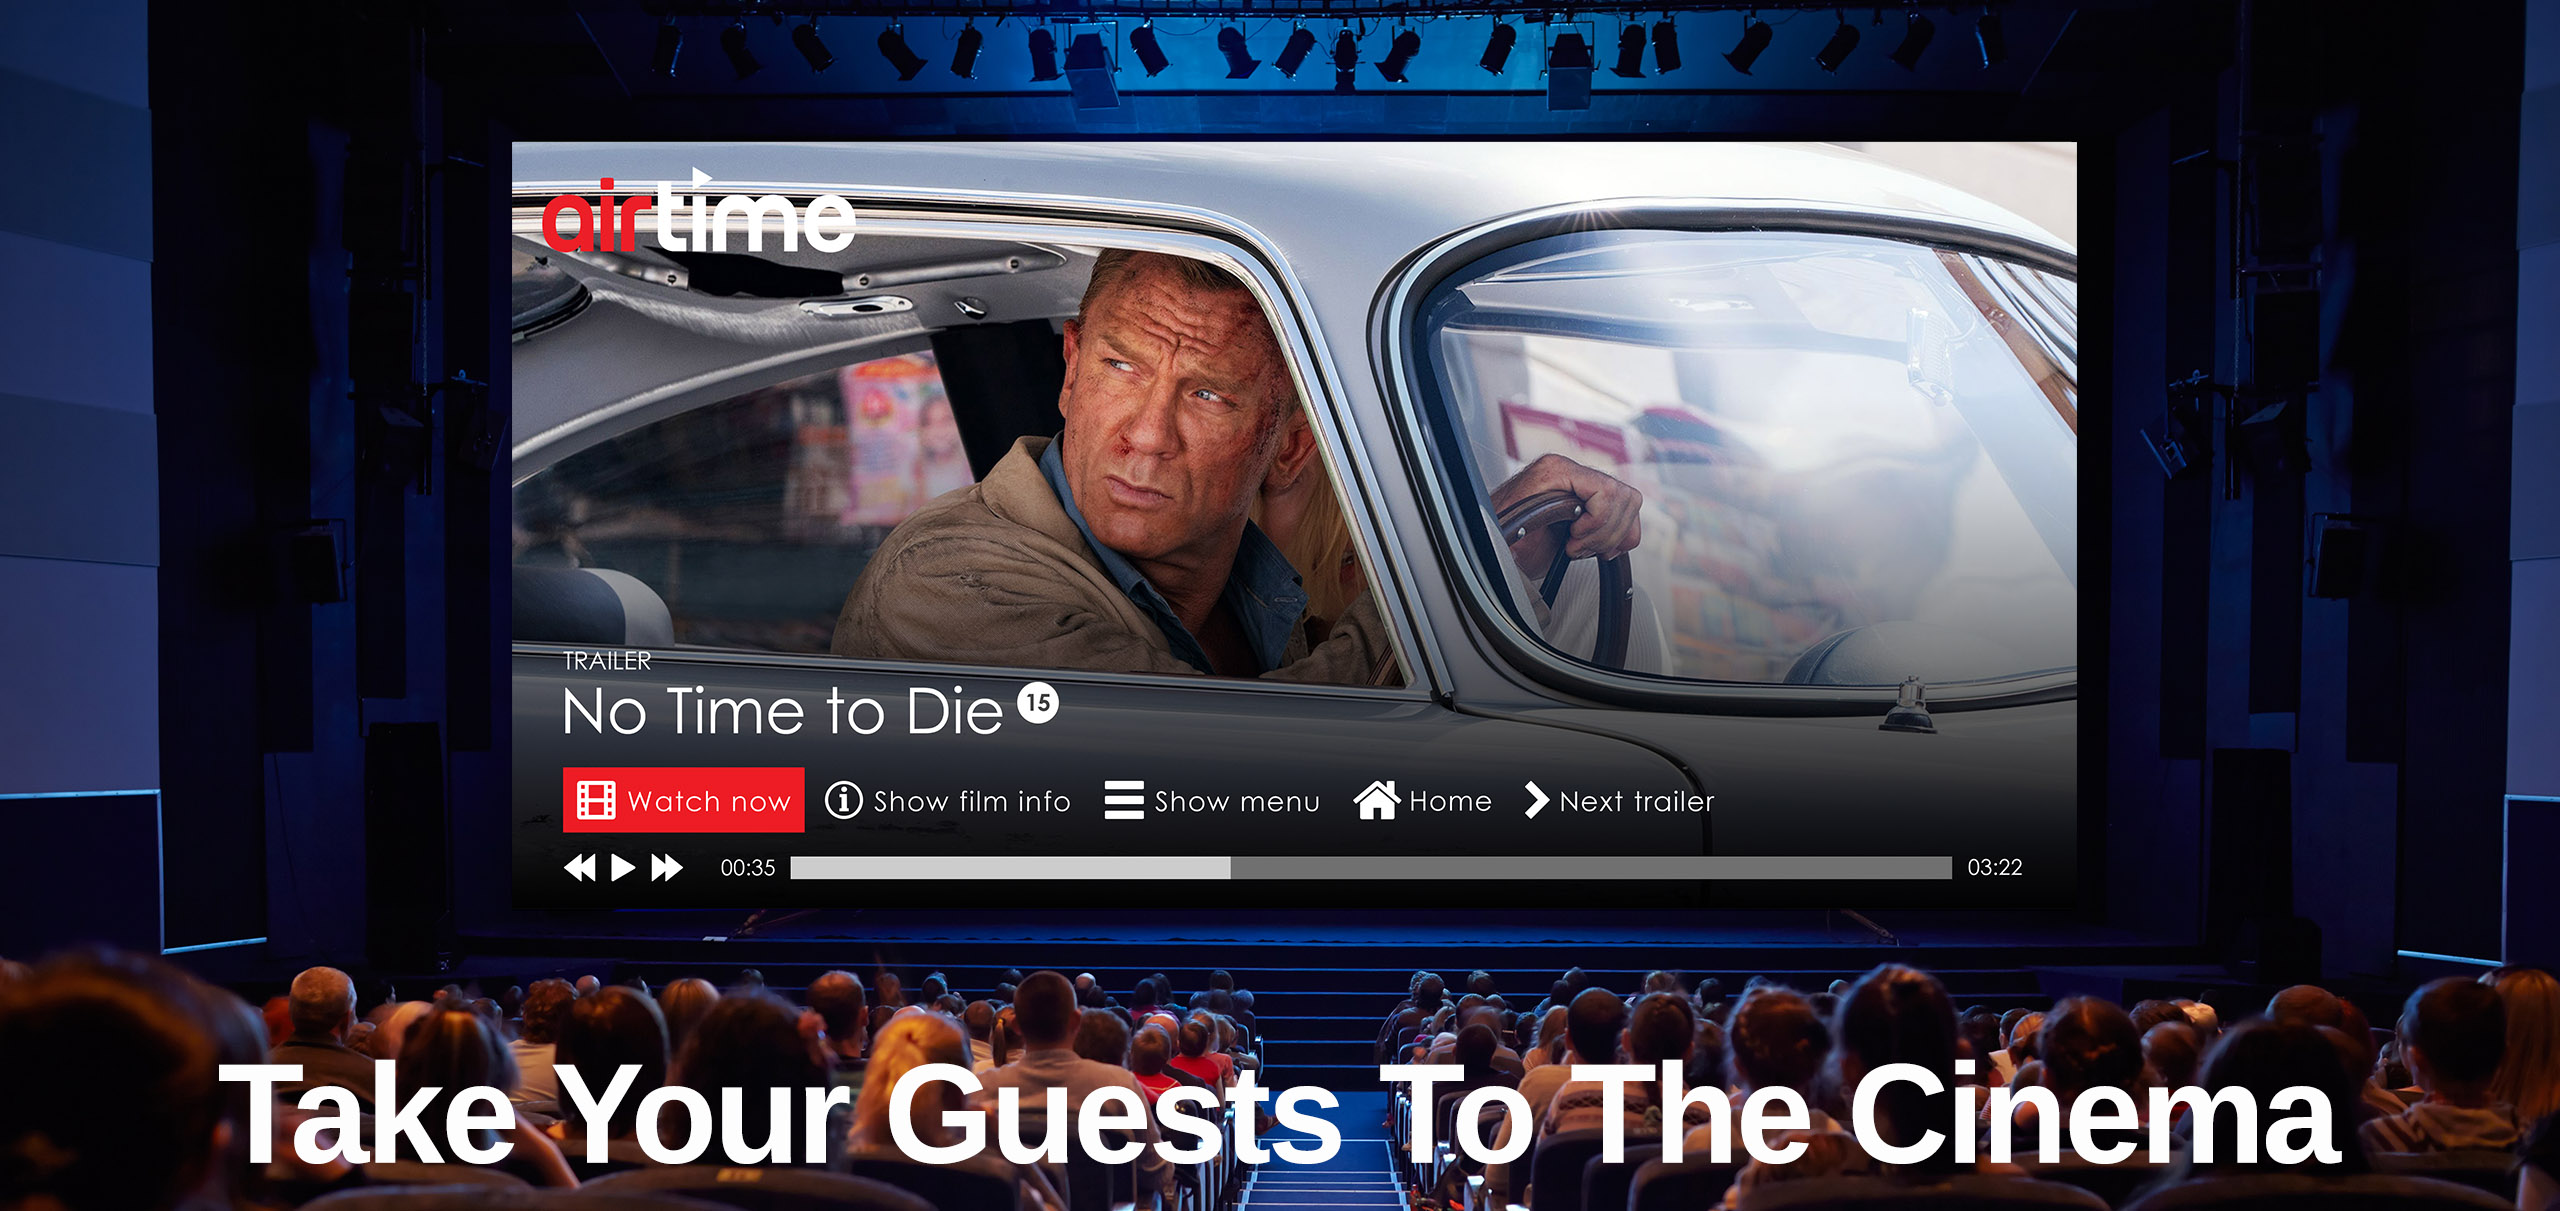 No Time To Die - James Bond is now available on Airtime to Stream to guests